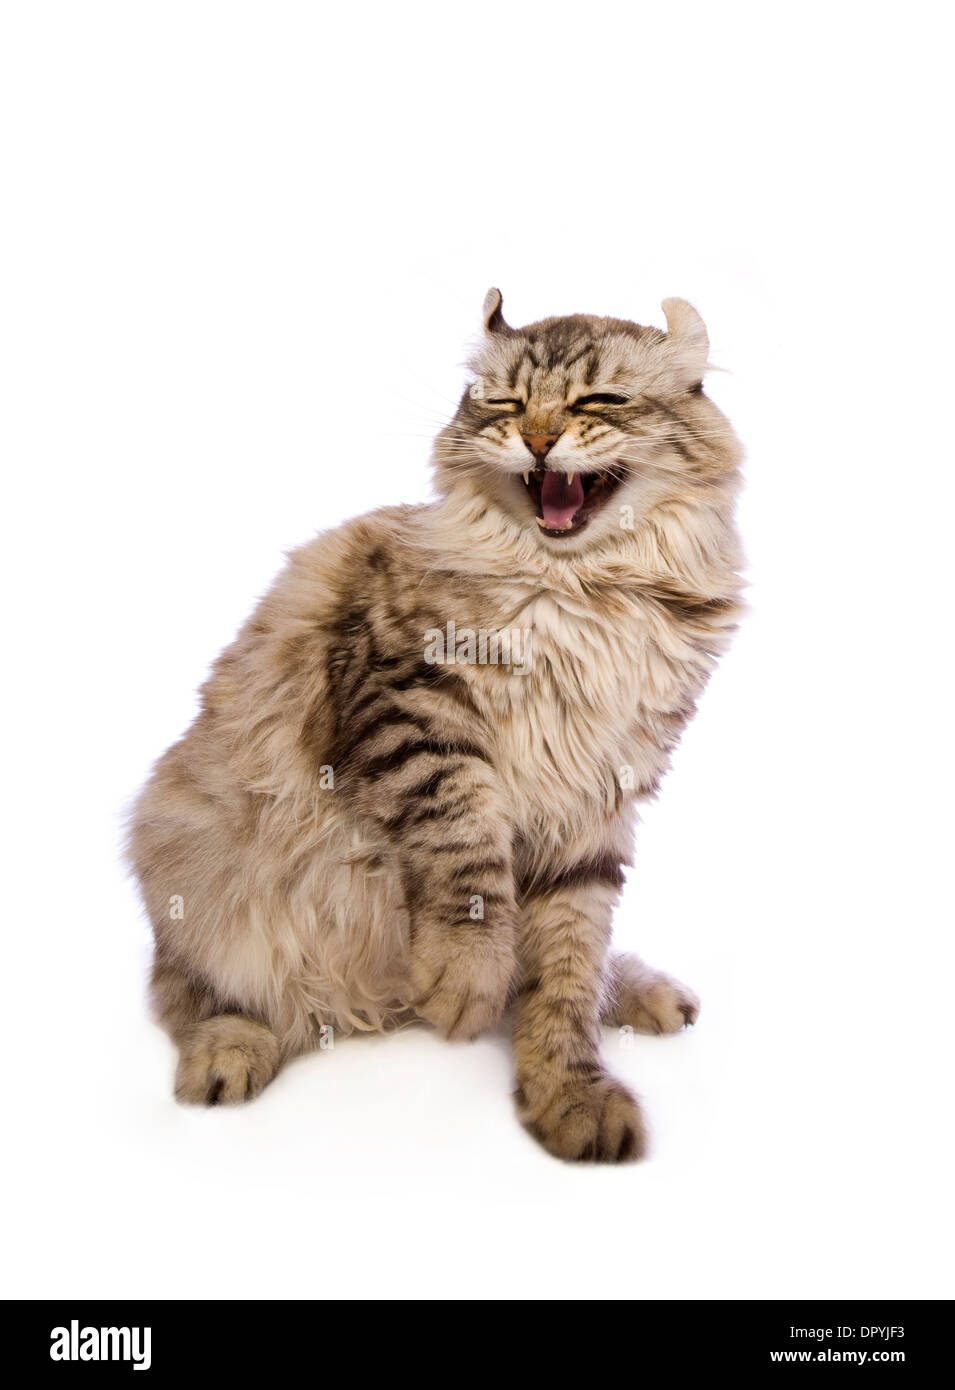 Funny scared lauging cat with paw up isolated on white background Stock Photo